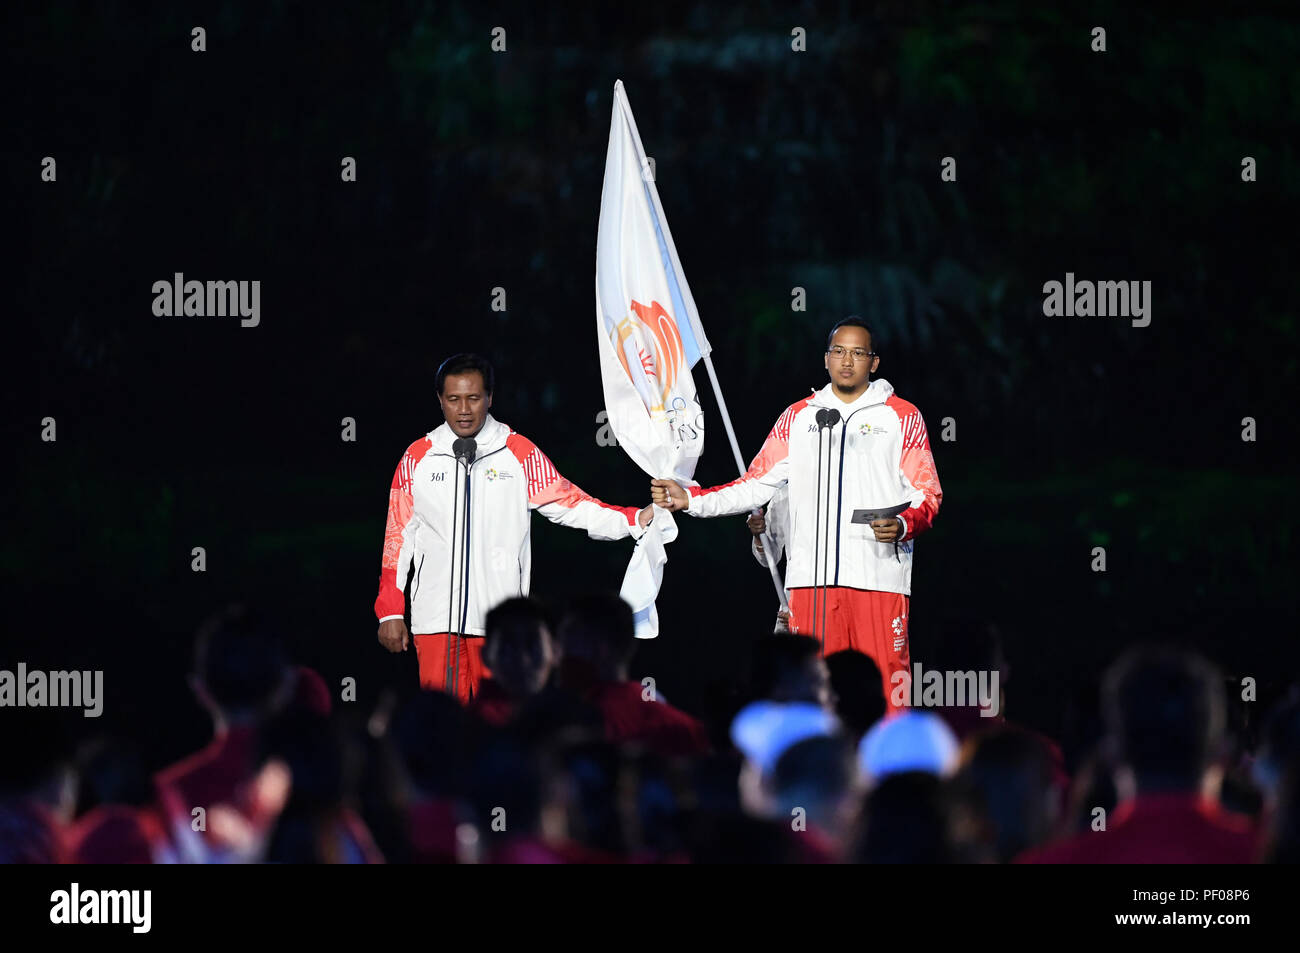 Jakarta, Indonesia. 18th Aug, 2018. An oath-taking ceremony is held at the opening ceremony of the 18th Asian Games in Jakarta, Indonesia, Aug. 18, 2018. Credit: Du Yu/Xinhua/Alamy Live News Stock Photo